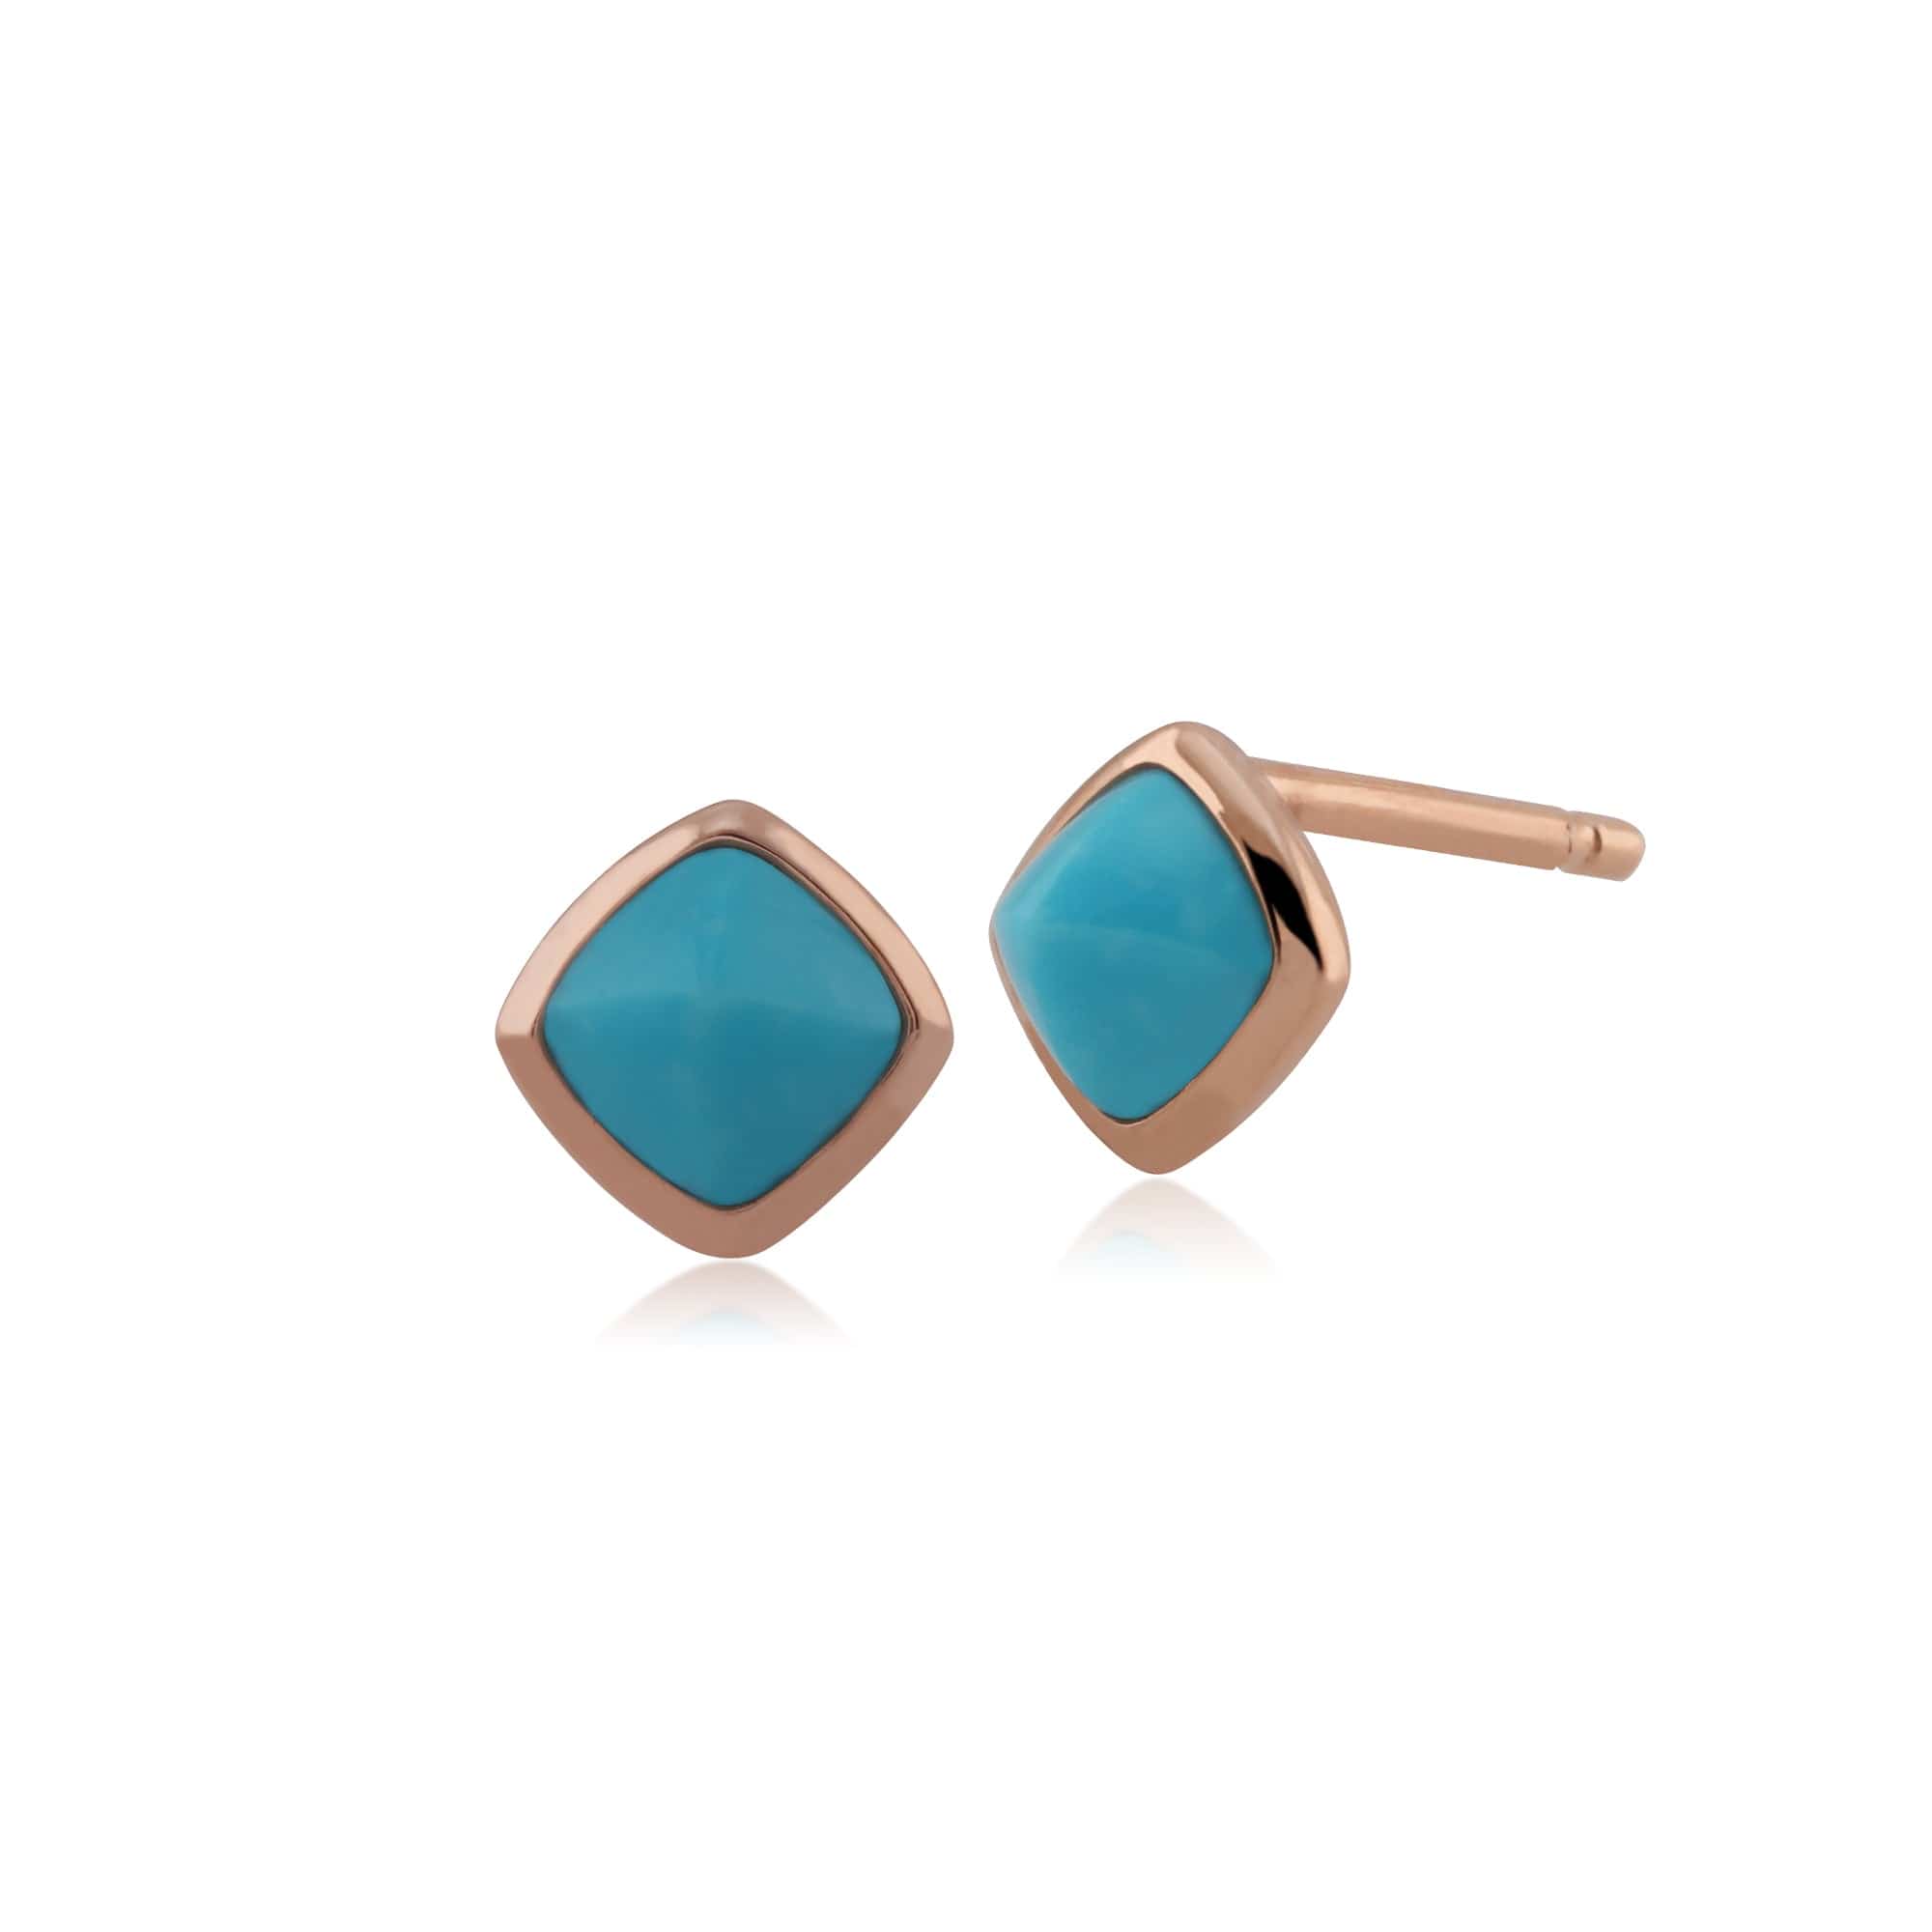 Gemondo Rose Gold Plated Sterling Silver Cushion Turquoise 5mm Stud Earrings Image